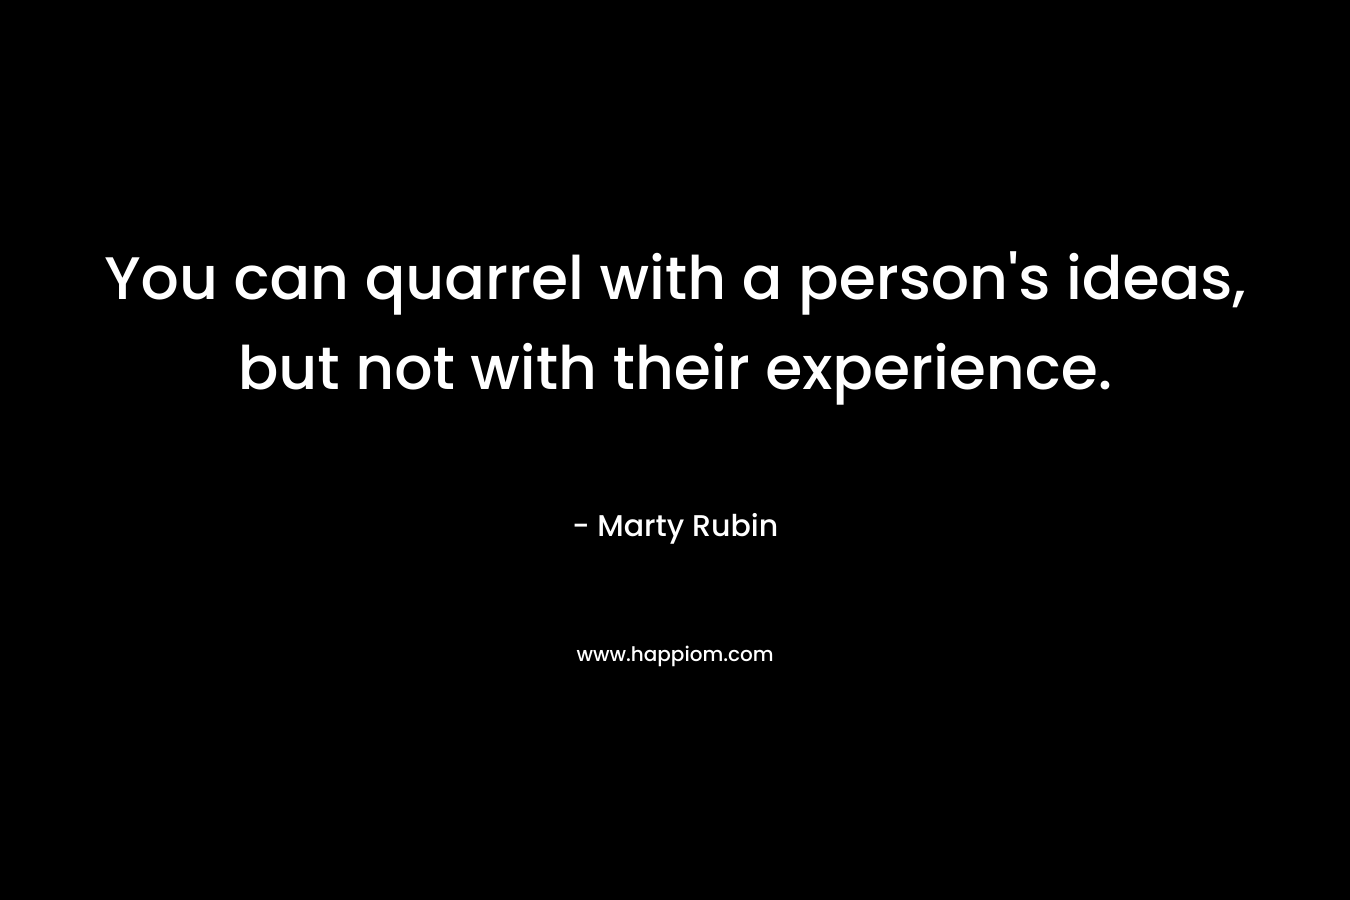 You can quarrel with a person's ideas, but not with their experience.